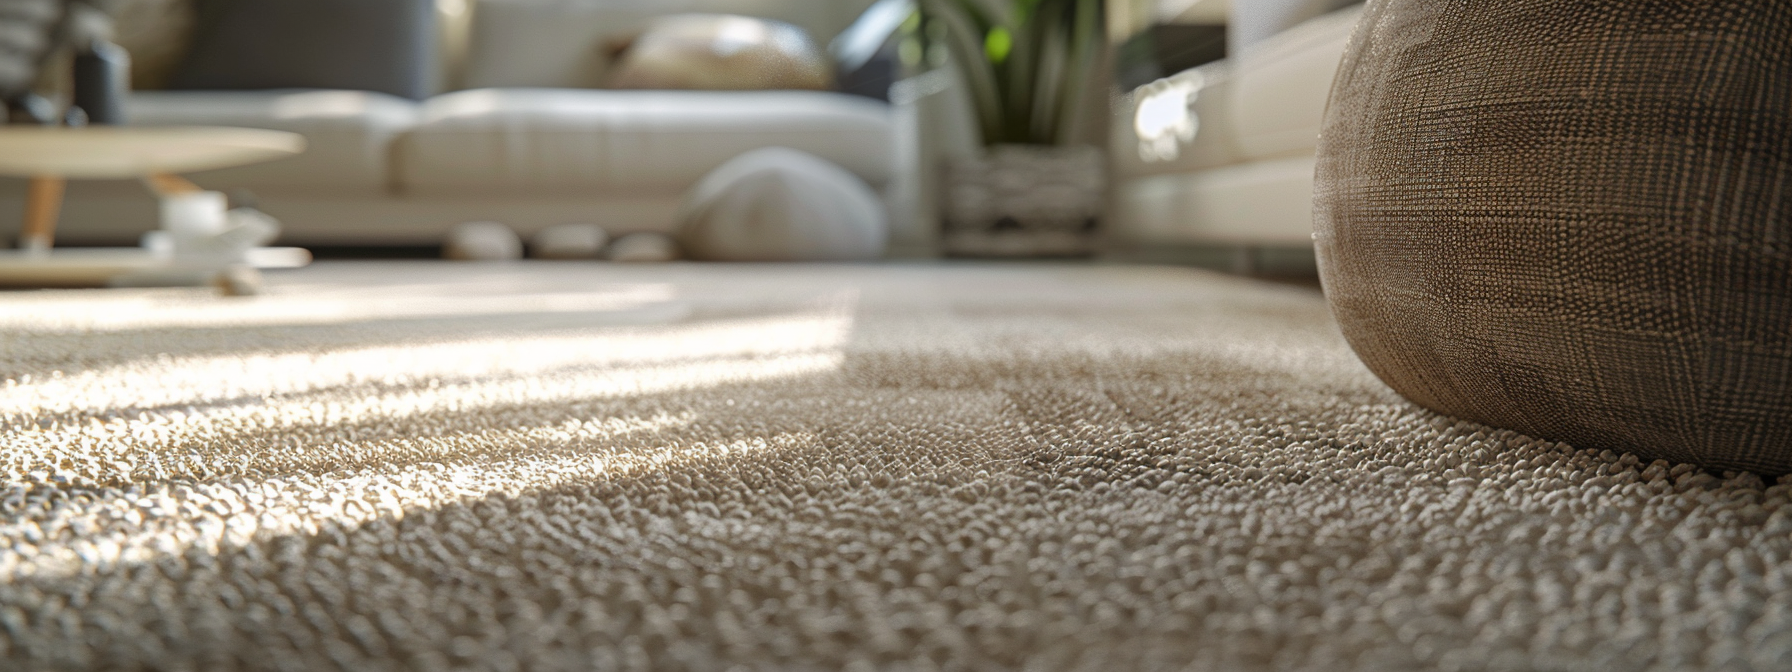 Common Mistakes to Avoid When Patching a Carpet